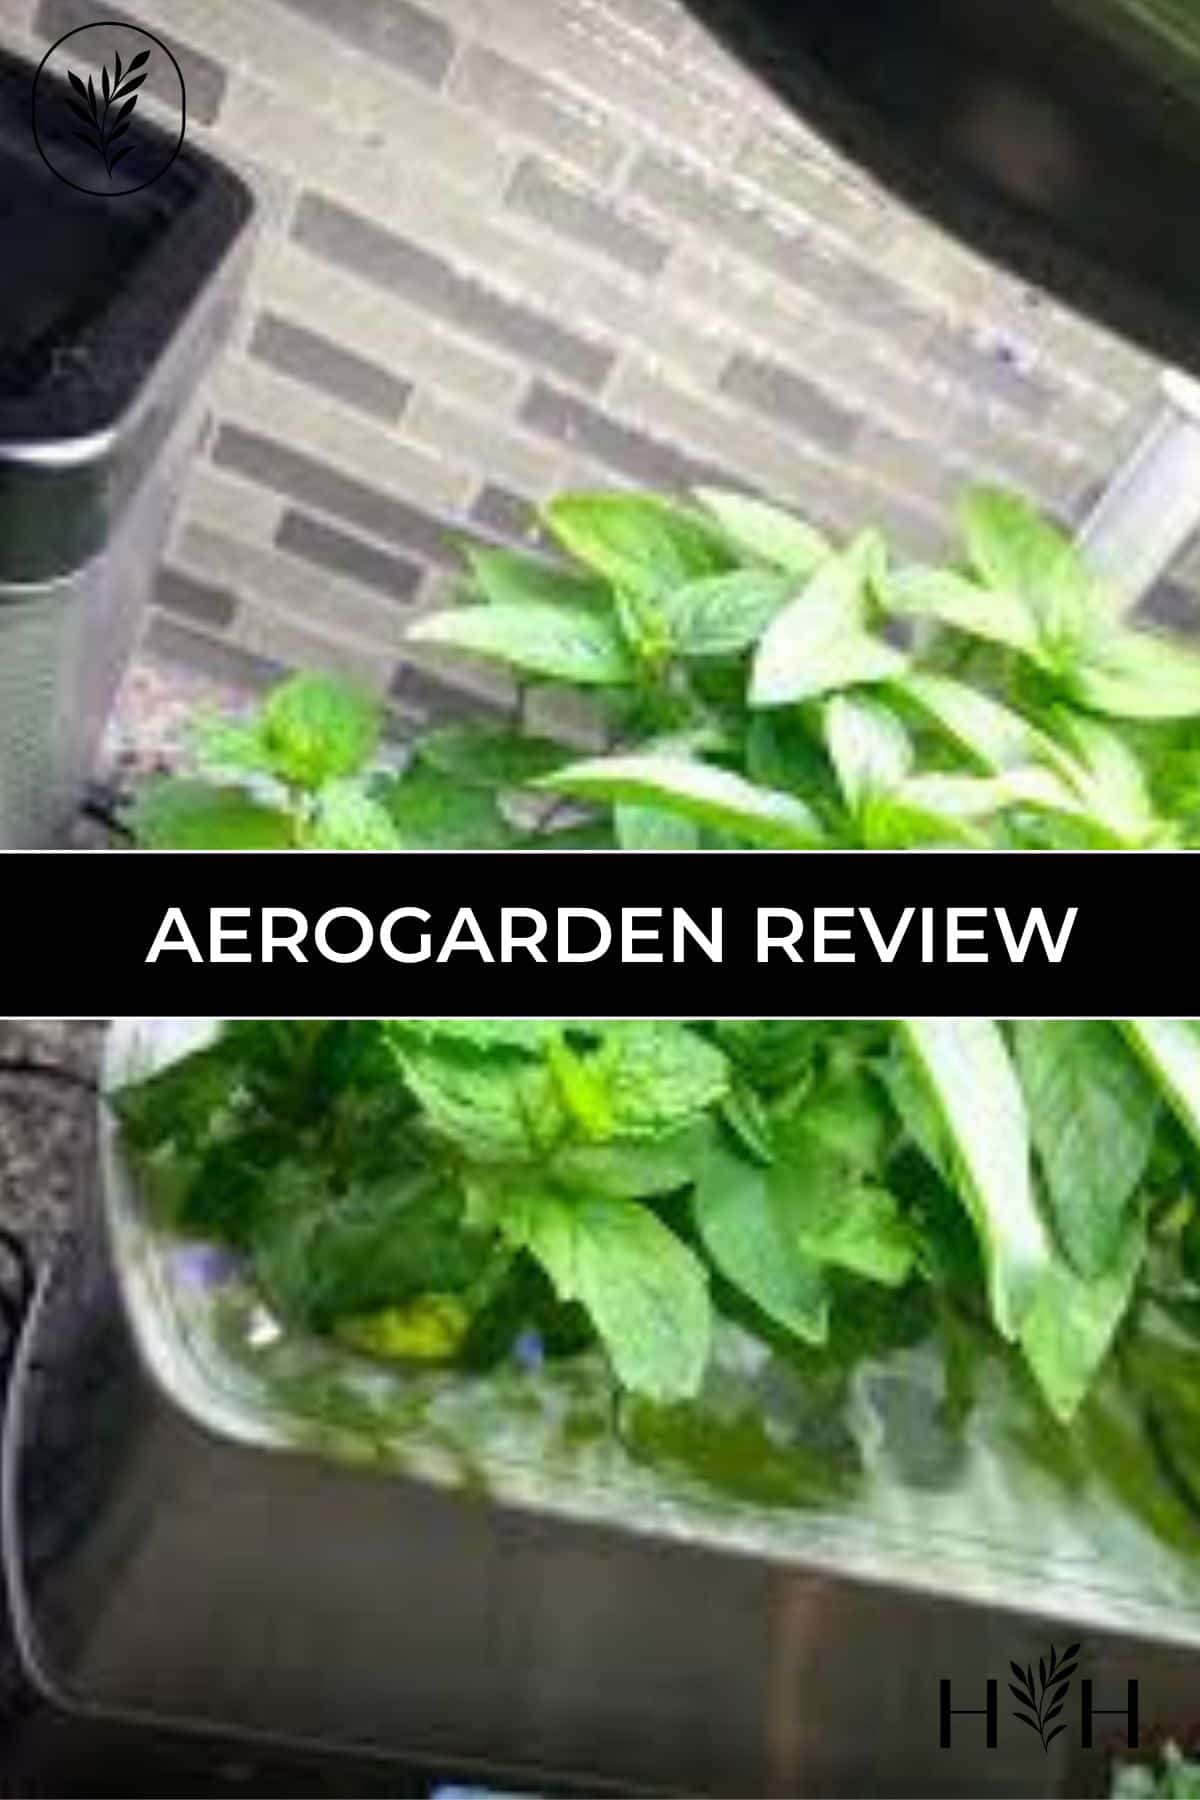 I absolutely love my aerogarden! There are a few different models from which to choose. I like the harvest aerogarden smart garden, as its super cost-effective and easy to use #garden #gardening #aerogarden via @home4theharvest